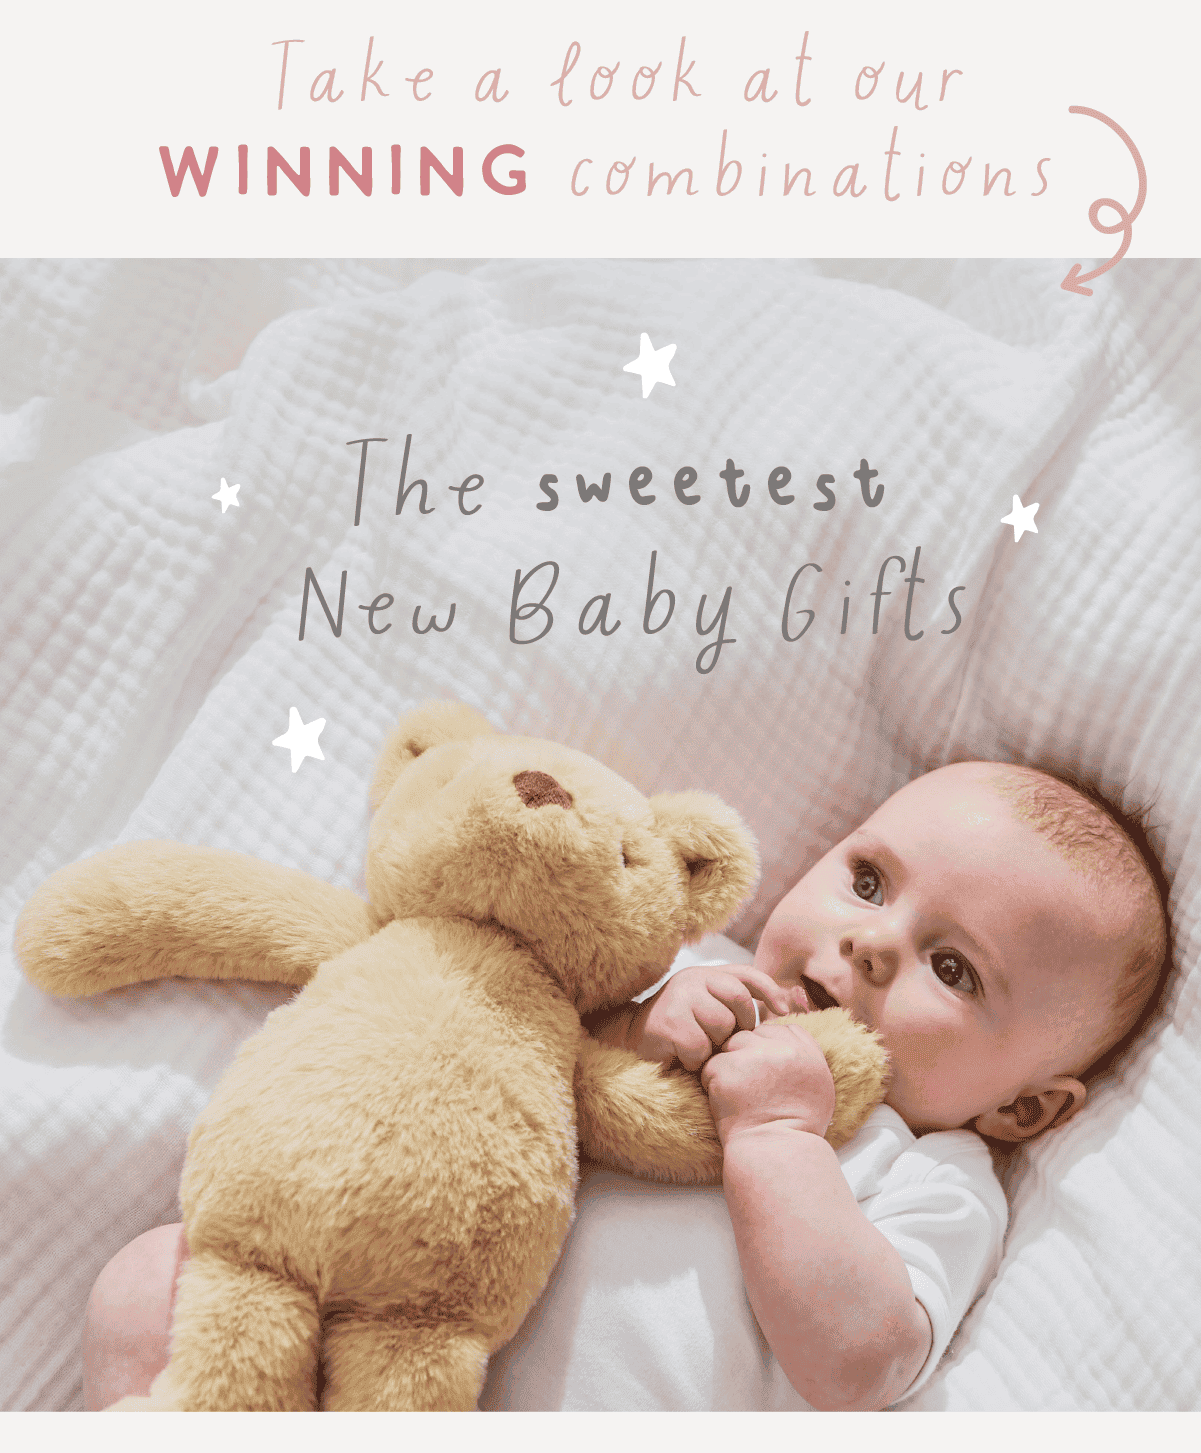 The sweetest New Baby Gifts